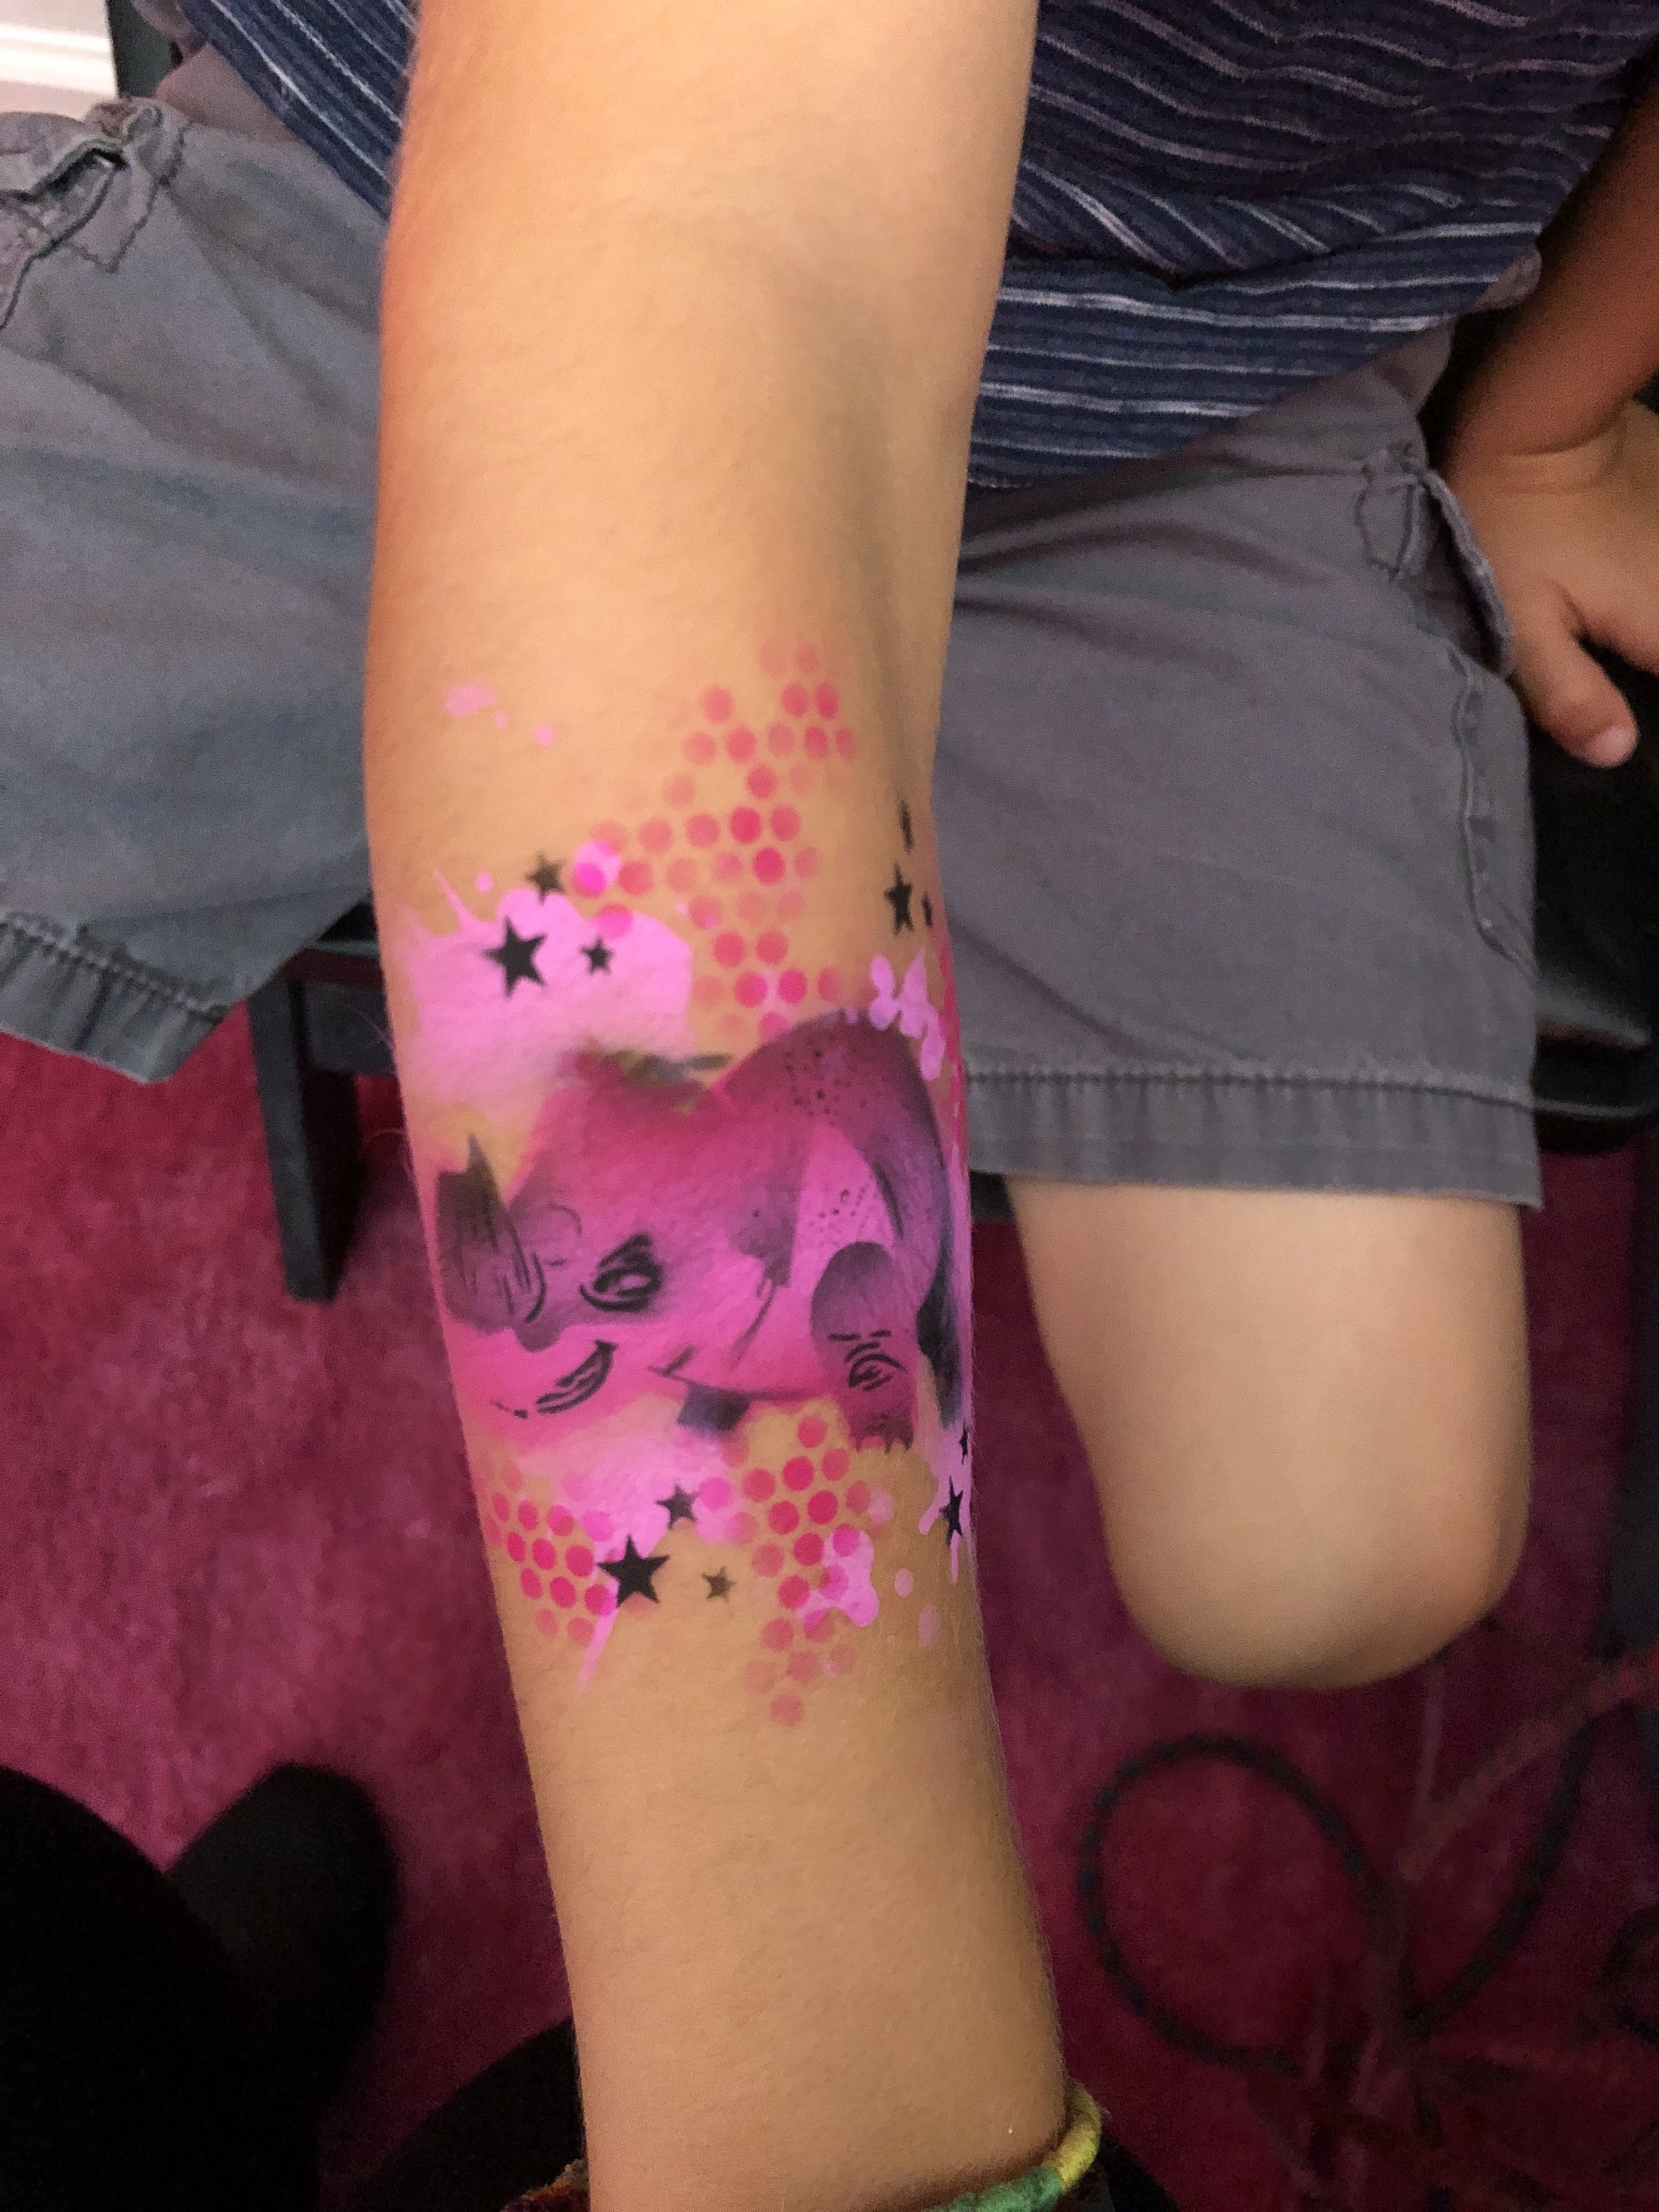 Airbrush Tattoos for Parties Near Me Hamptons and Long Island.JPG